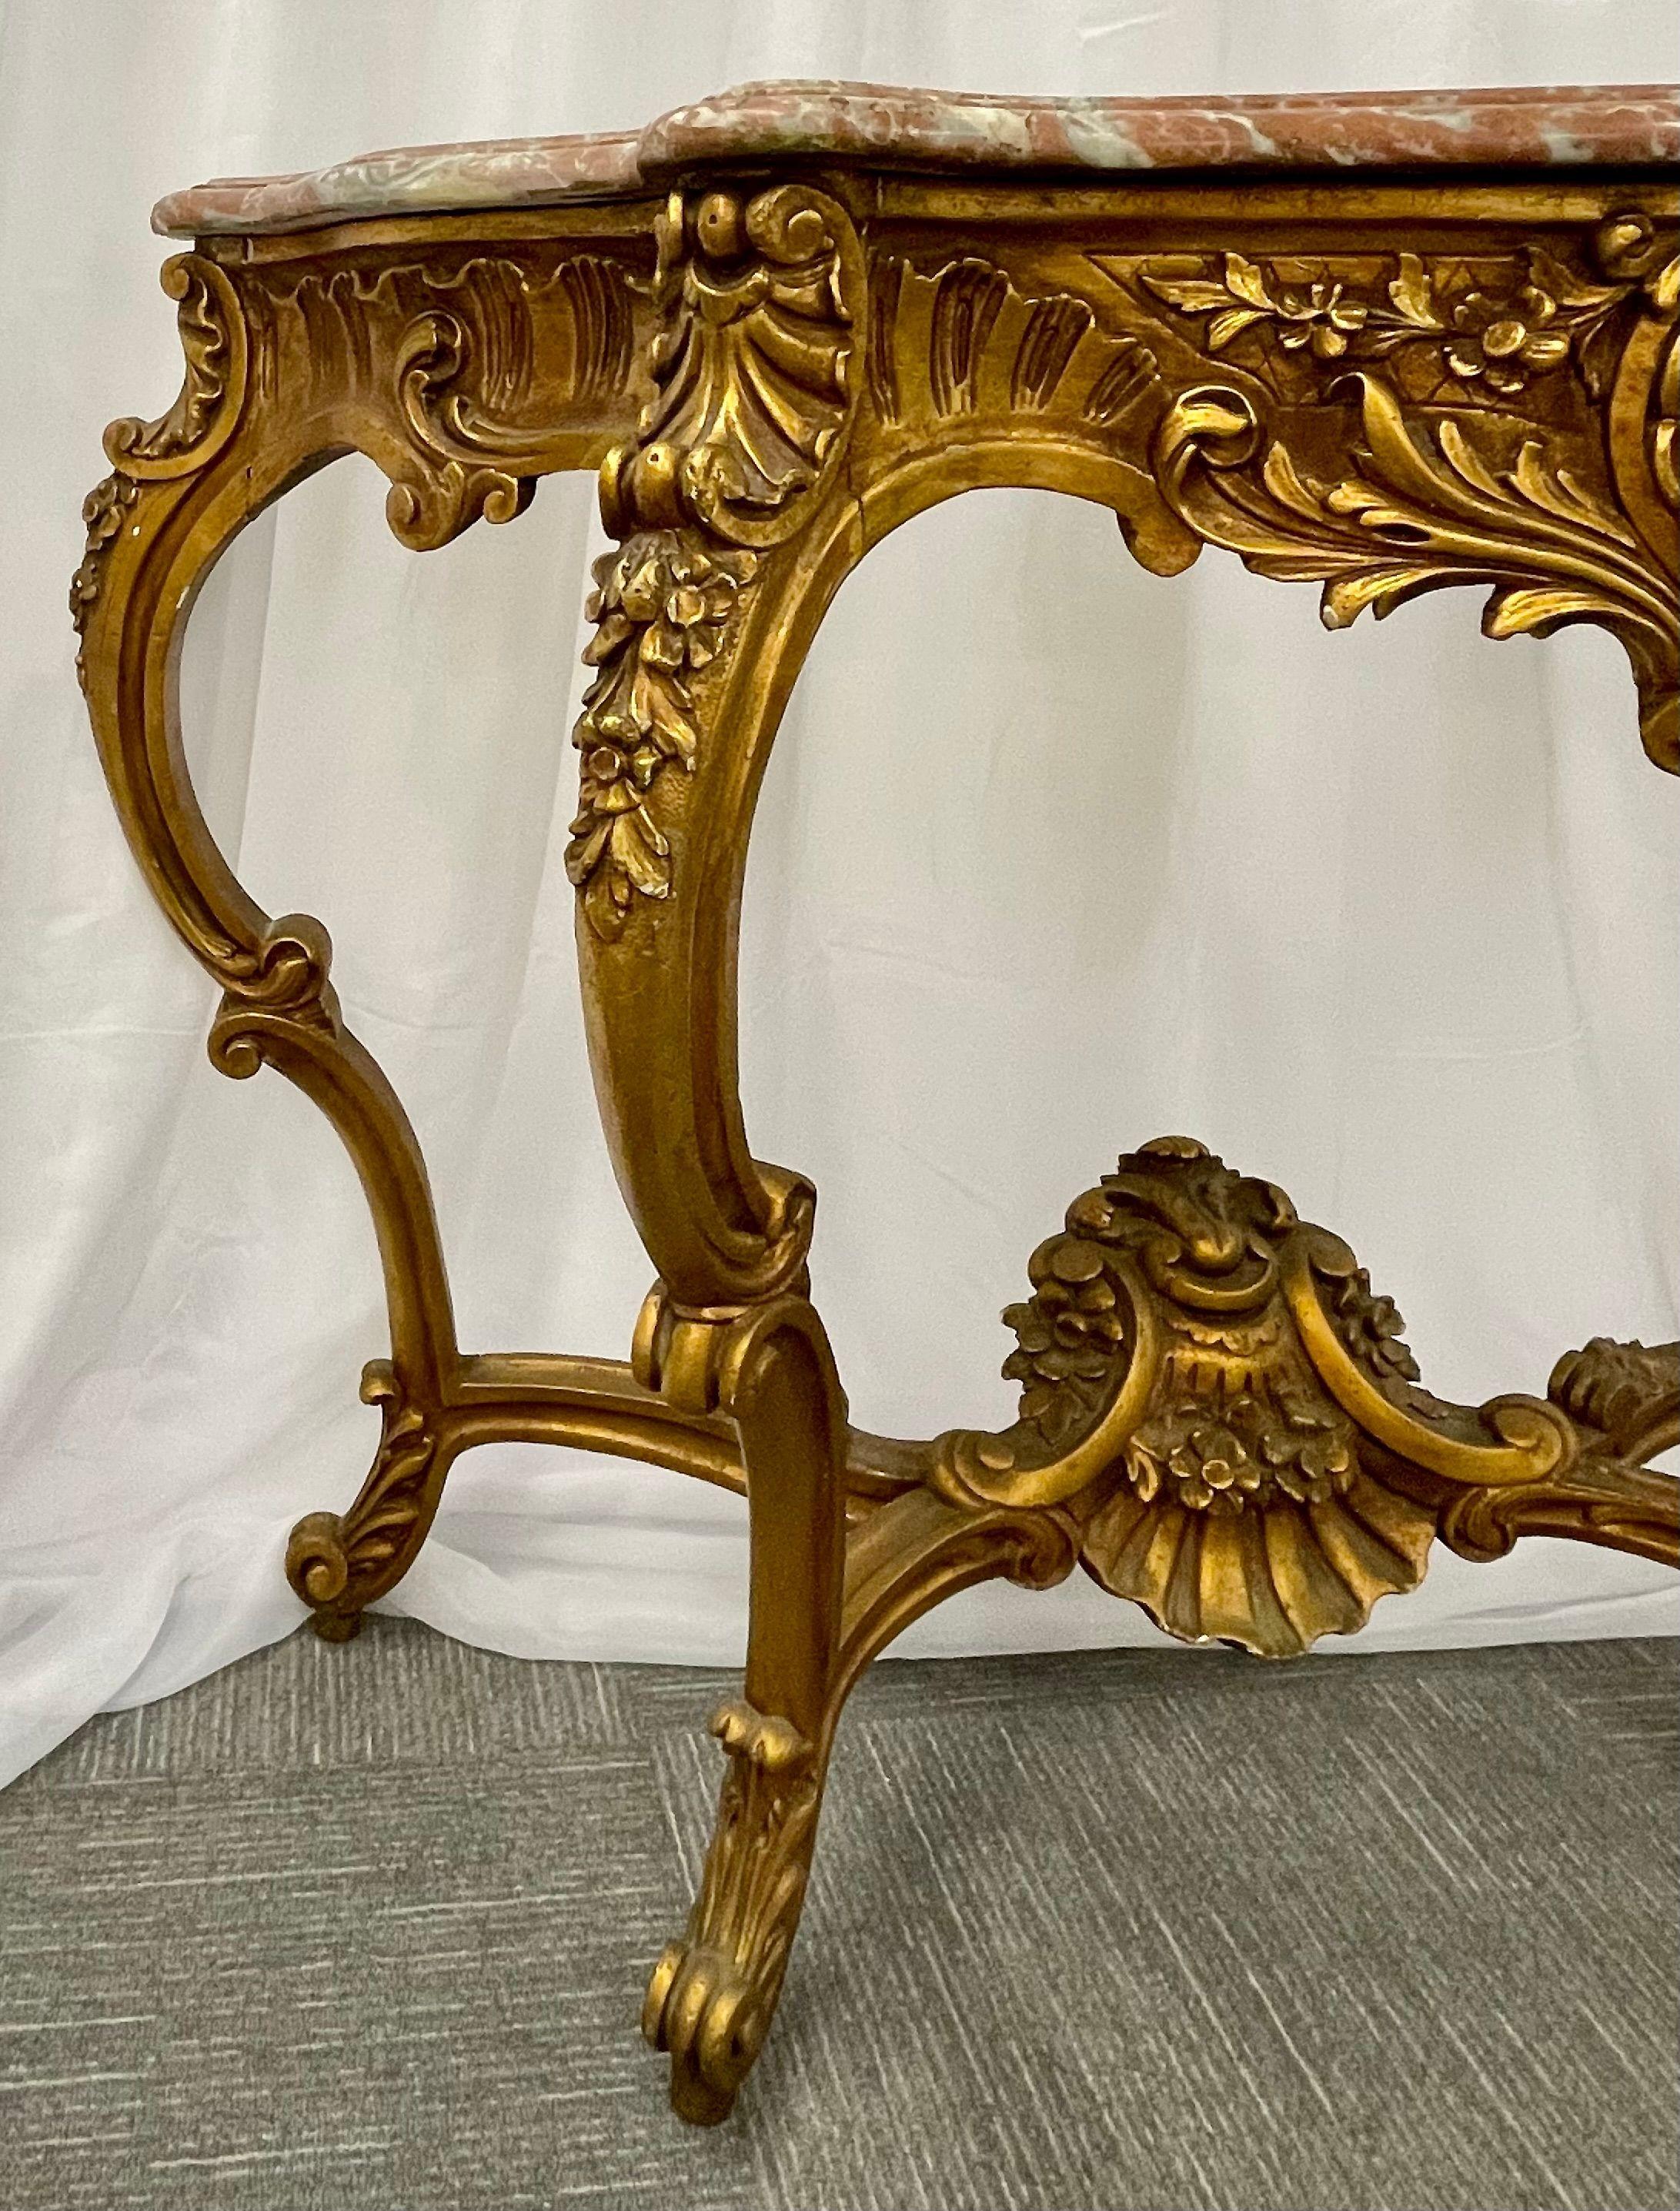 Marble-Top Louis XV Style Console Table by Jansen Exquisite Carved Details 1920s For Sale 4